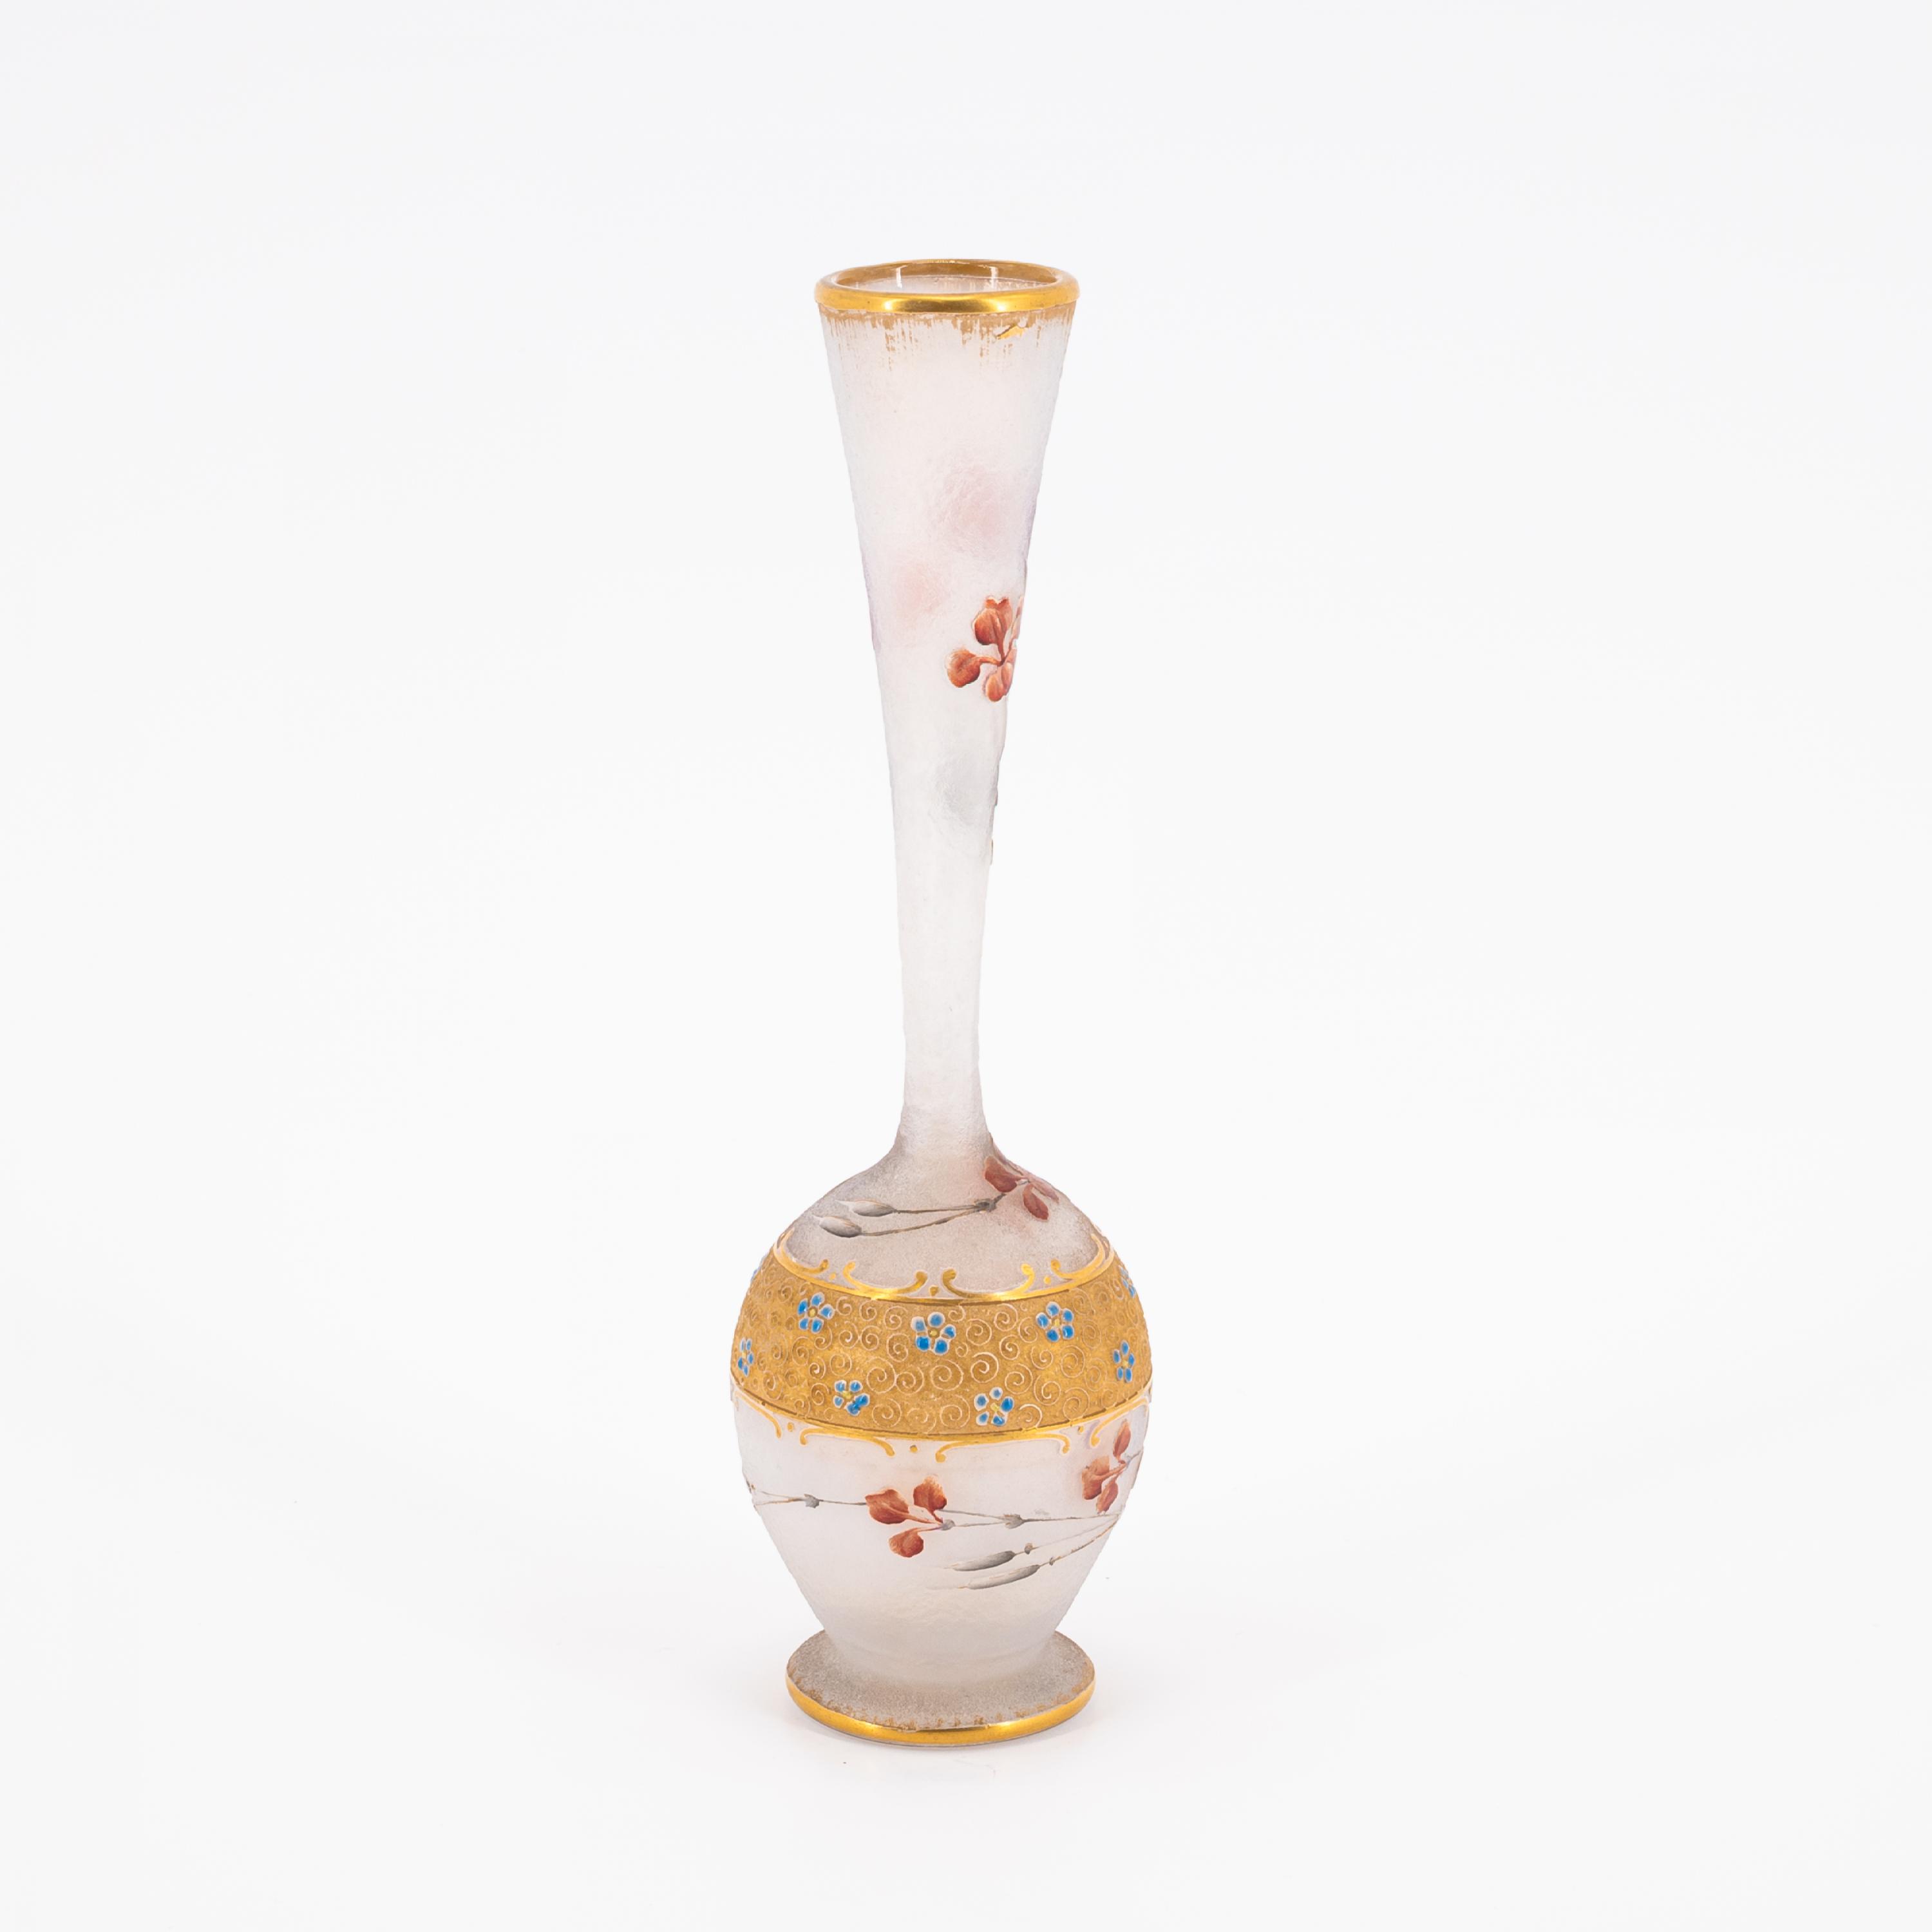 SMALL GLASS VASE WITH GOLD BORDER AND FINE FLORAL PATTERN - Image 3 of 6